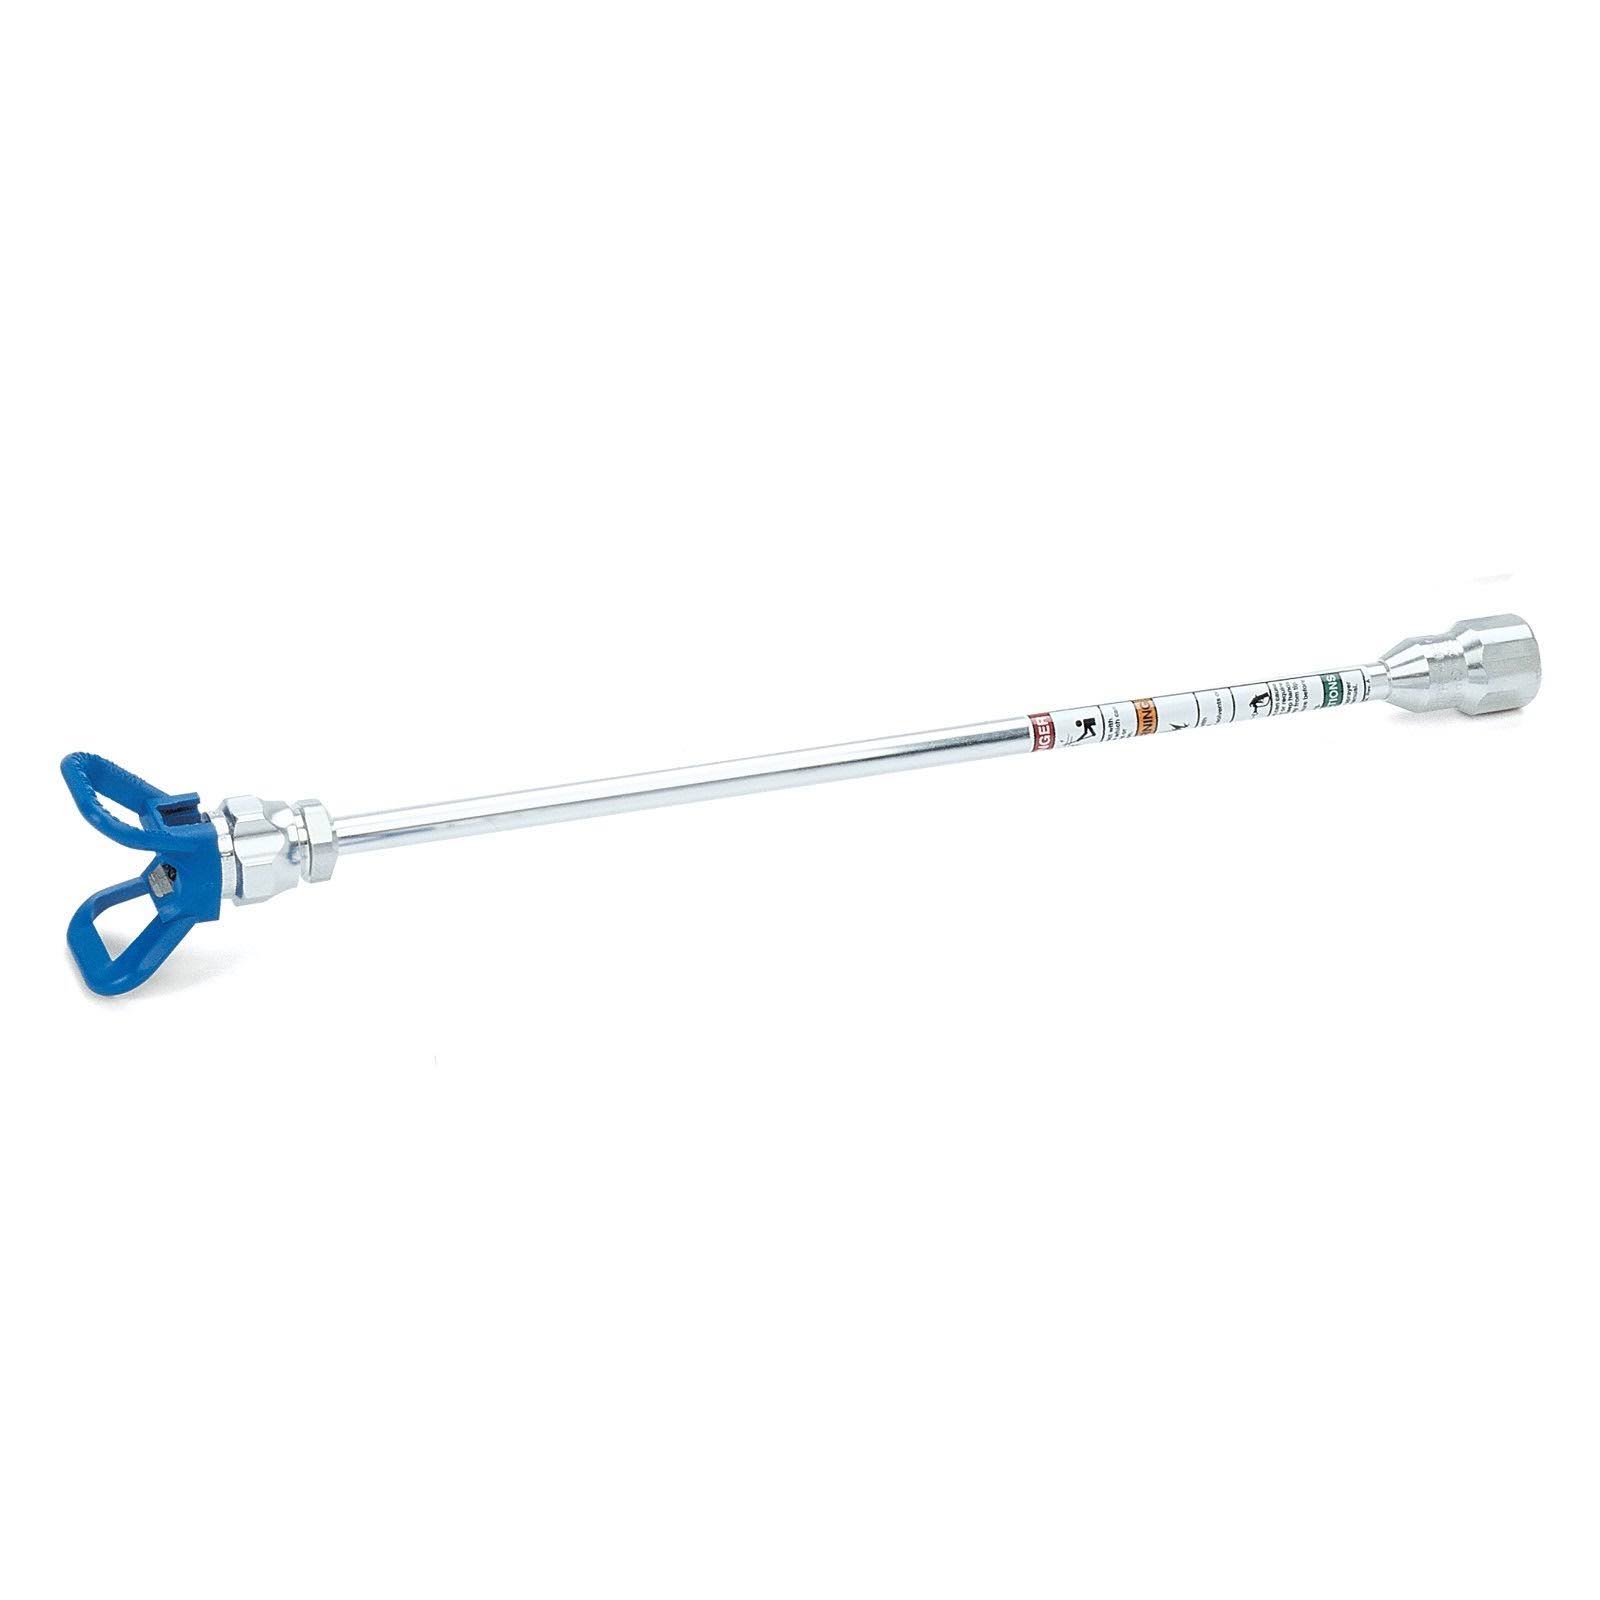 Graco 287020 Rac x Tip Extension, 15 in